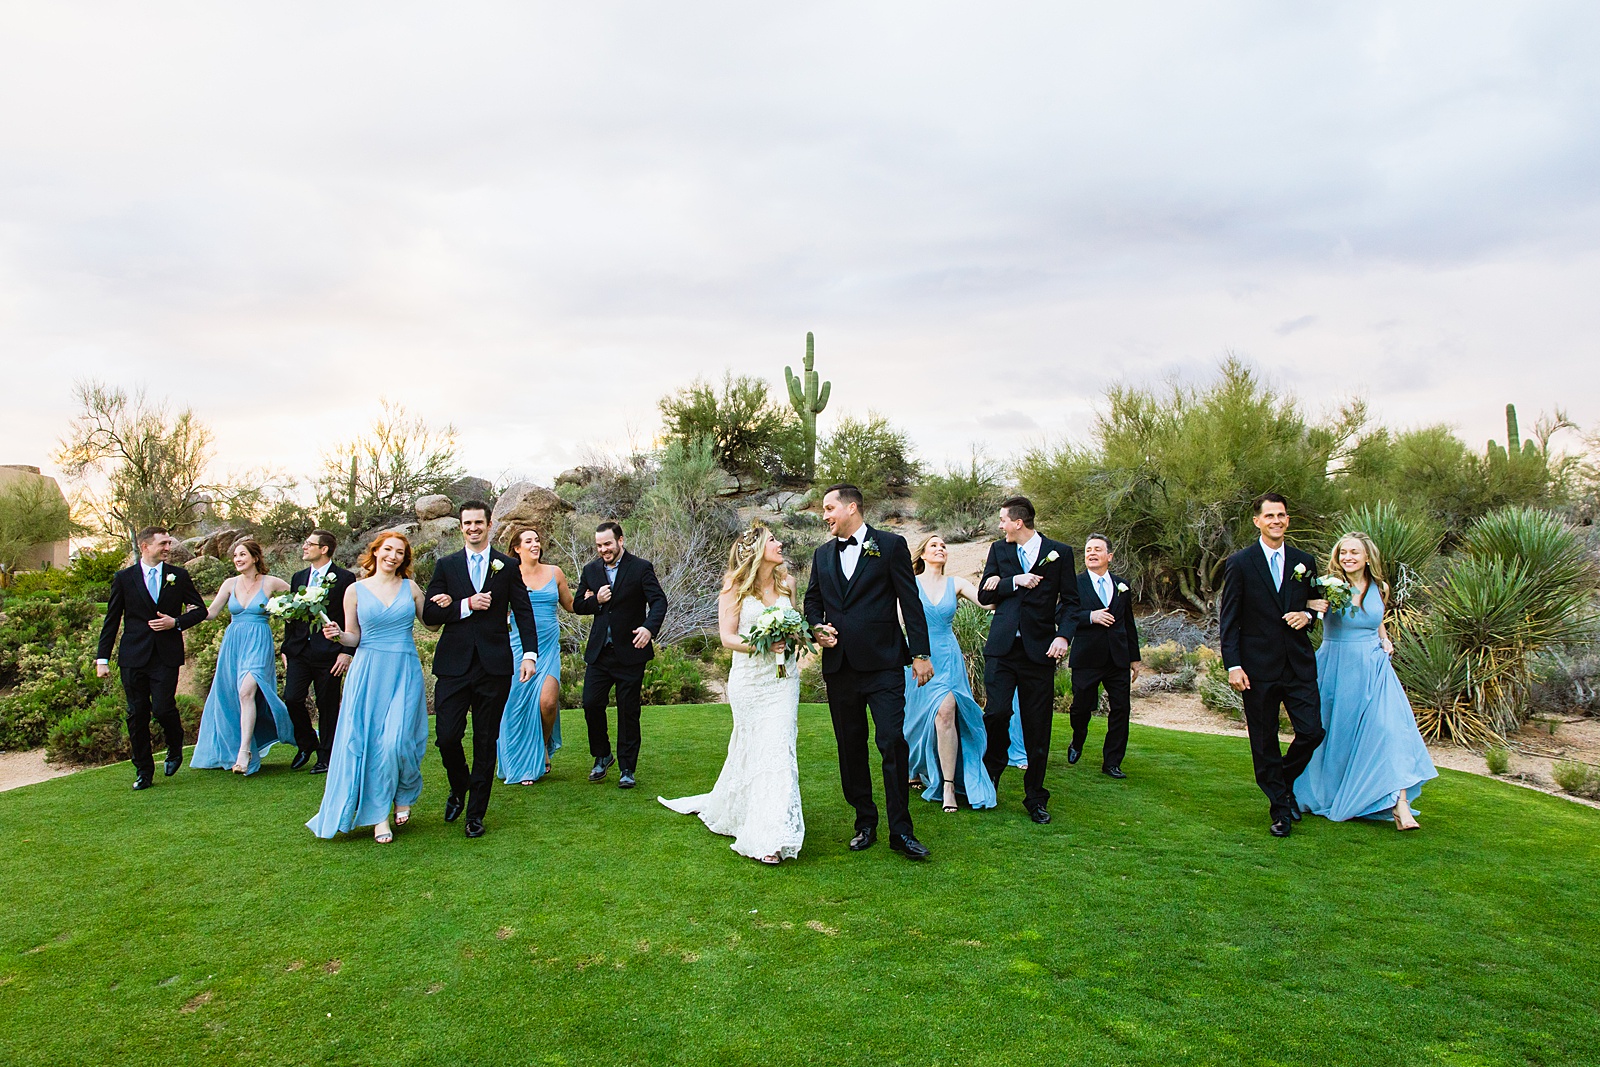 Bridal party walking together at a Troon North wedding by Arizona wedding photographer PMA Photography.